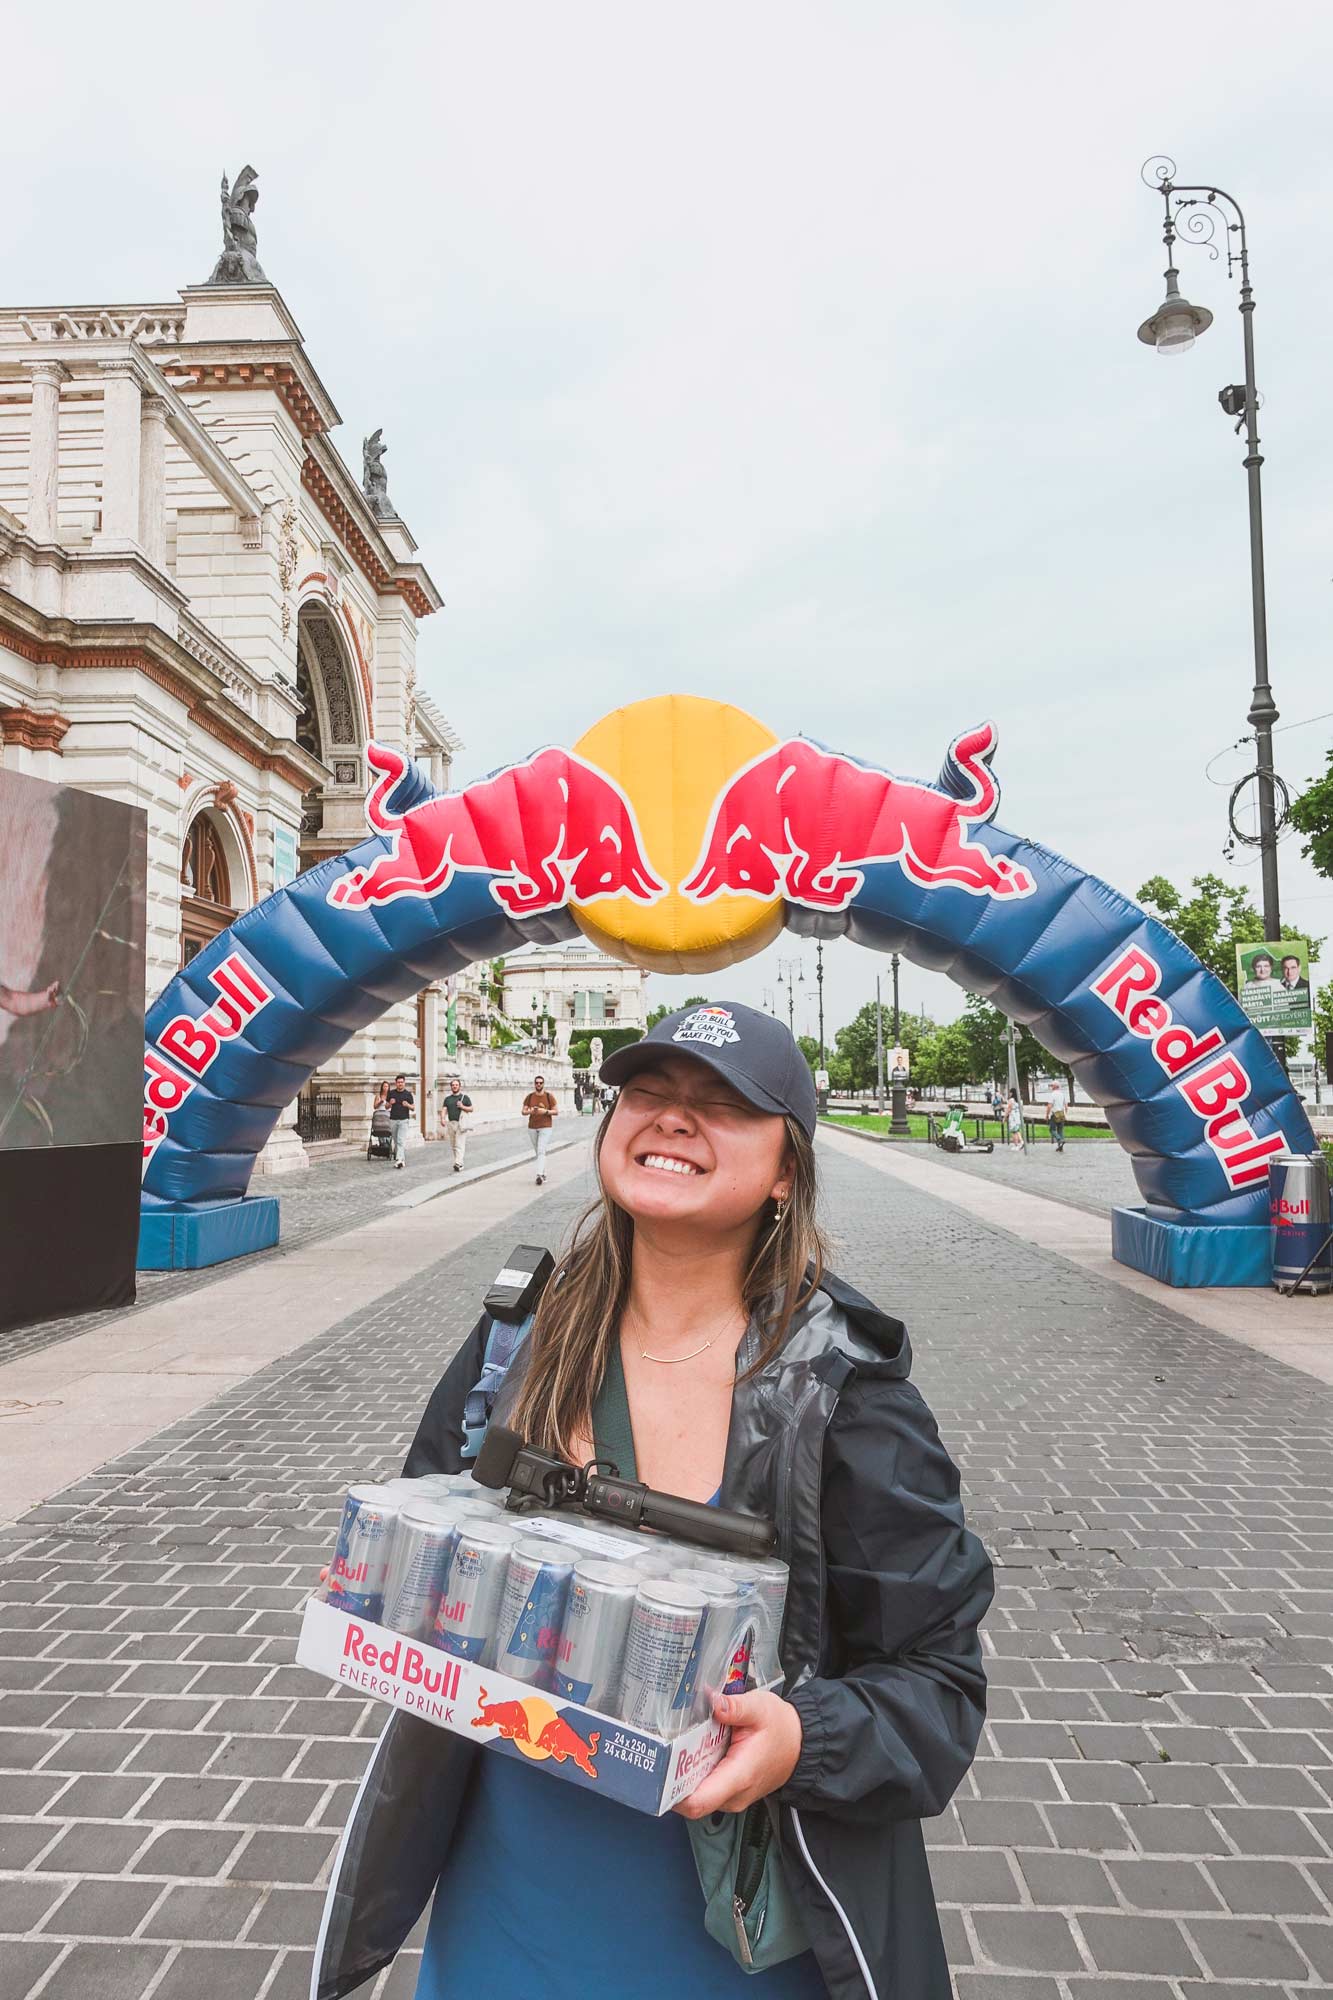 Khuyen at the starting line with the Red Bull cases